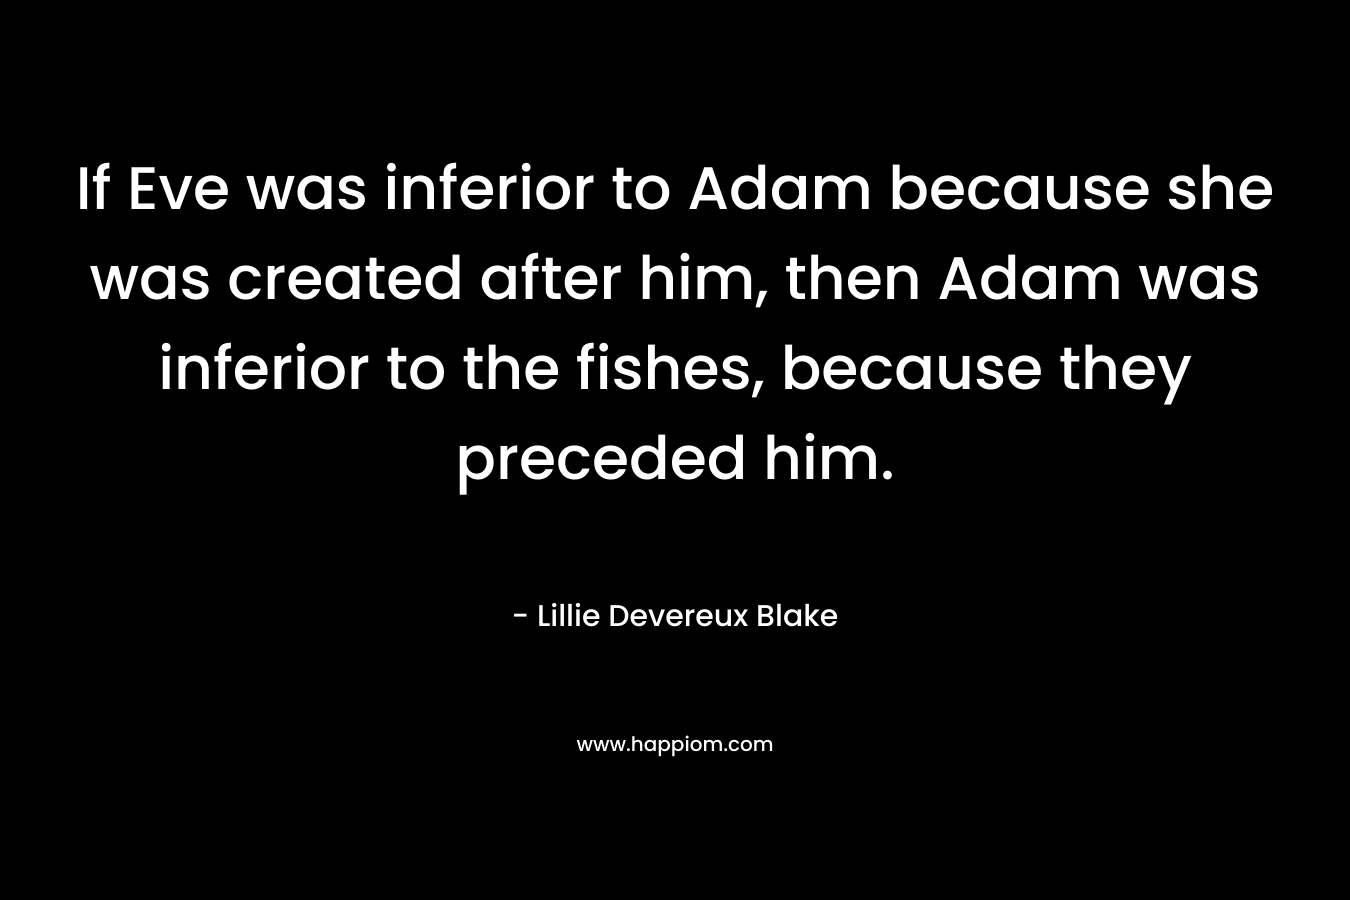 If Eve was inferior to Adam because she was created after him, then Adam was inferior to the fishes, because they preceded him. – Lillie Devereux Blake